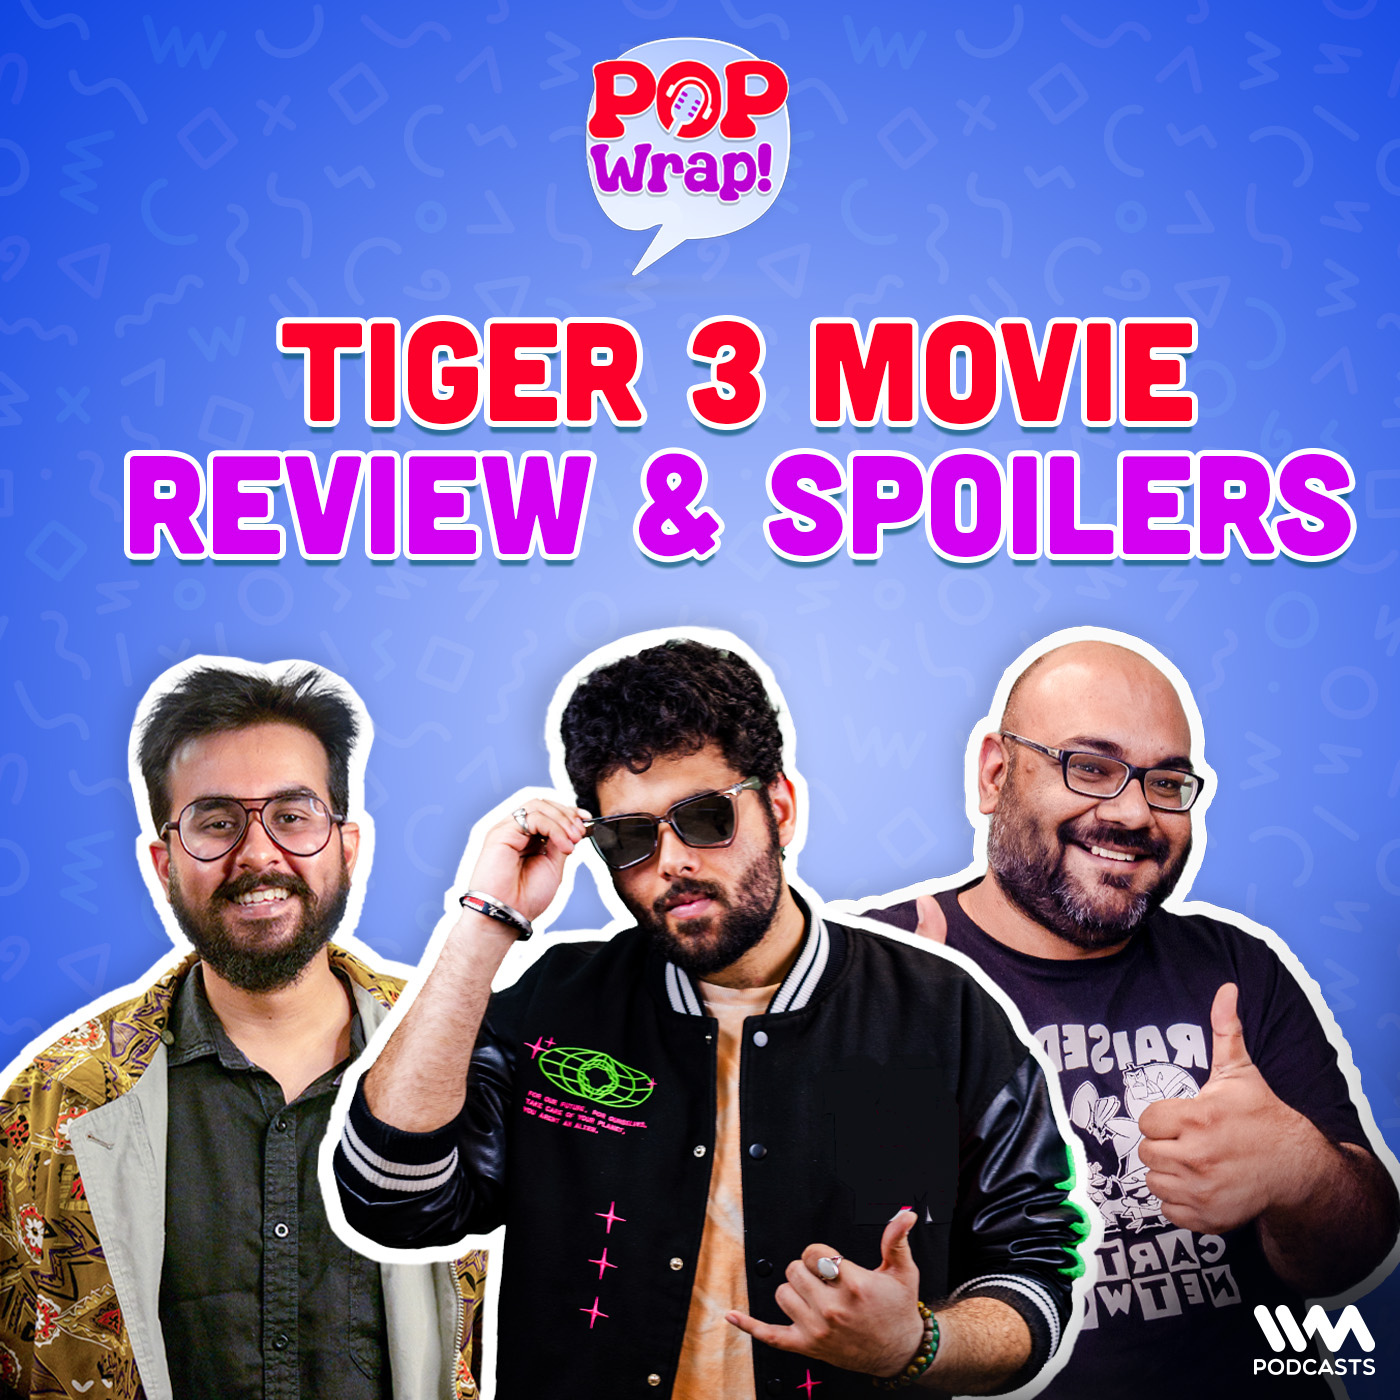 Tiger 3 Movie Review & Spoilers |Pop Wrap!